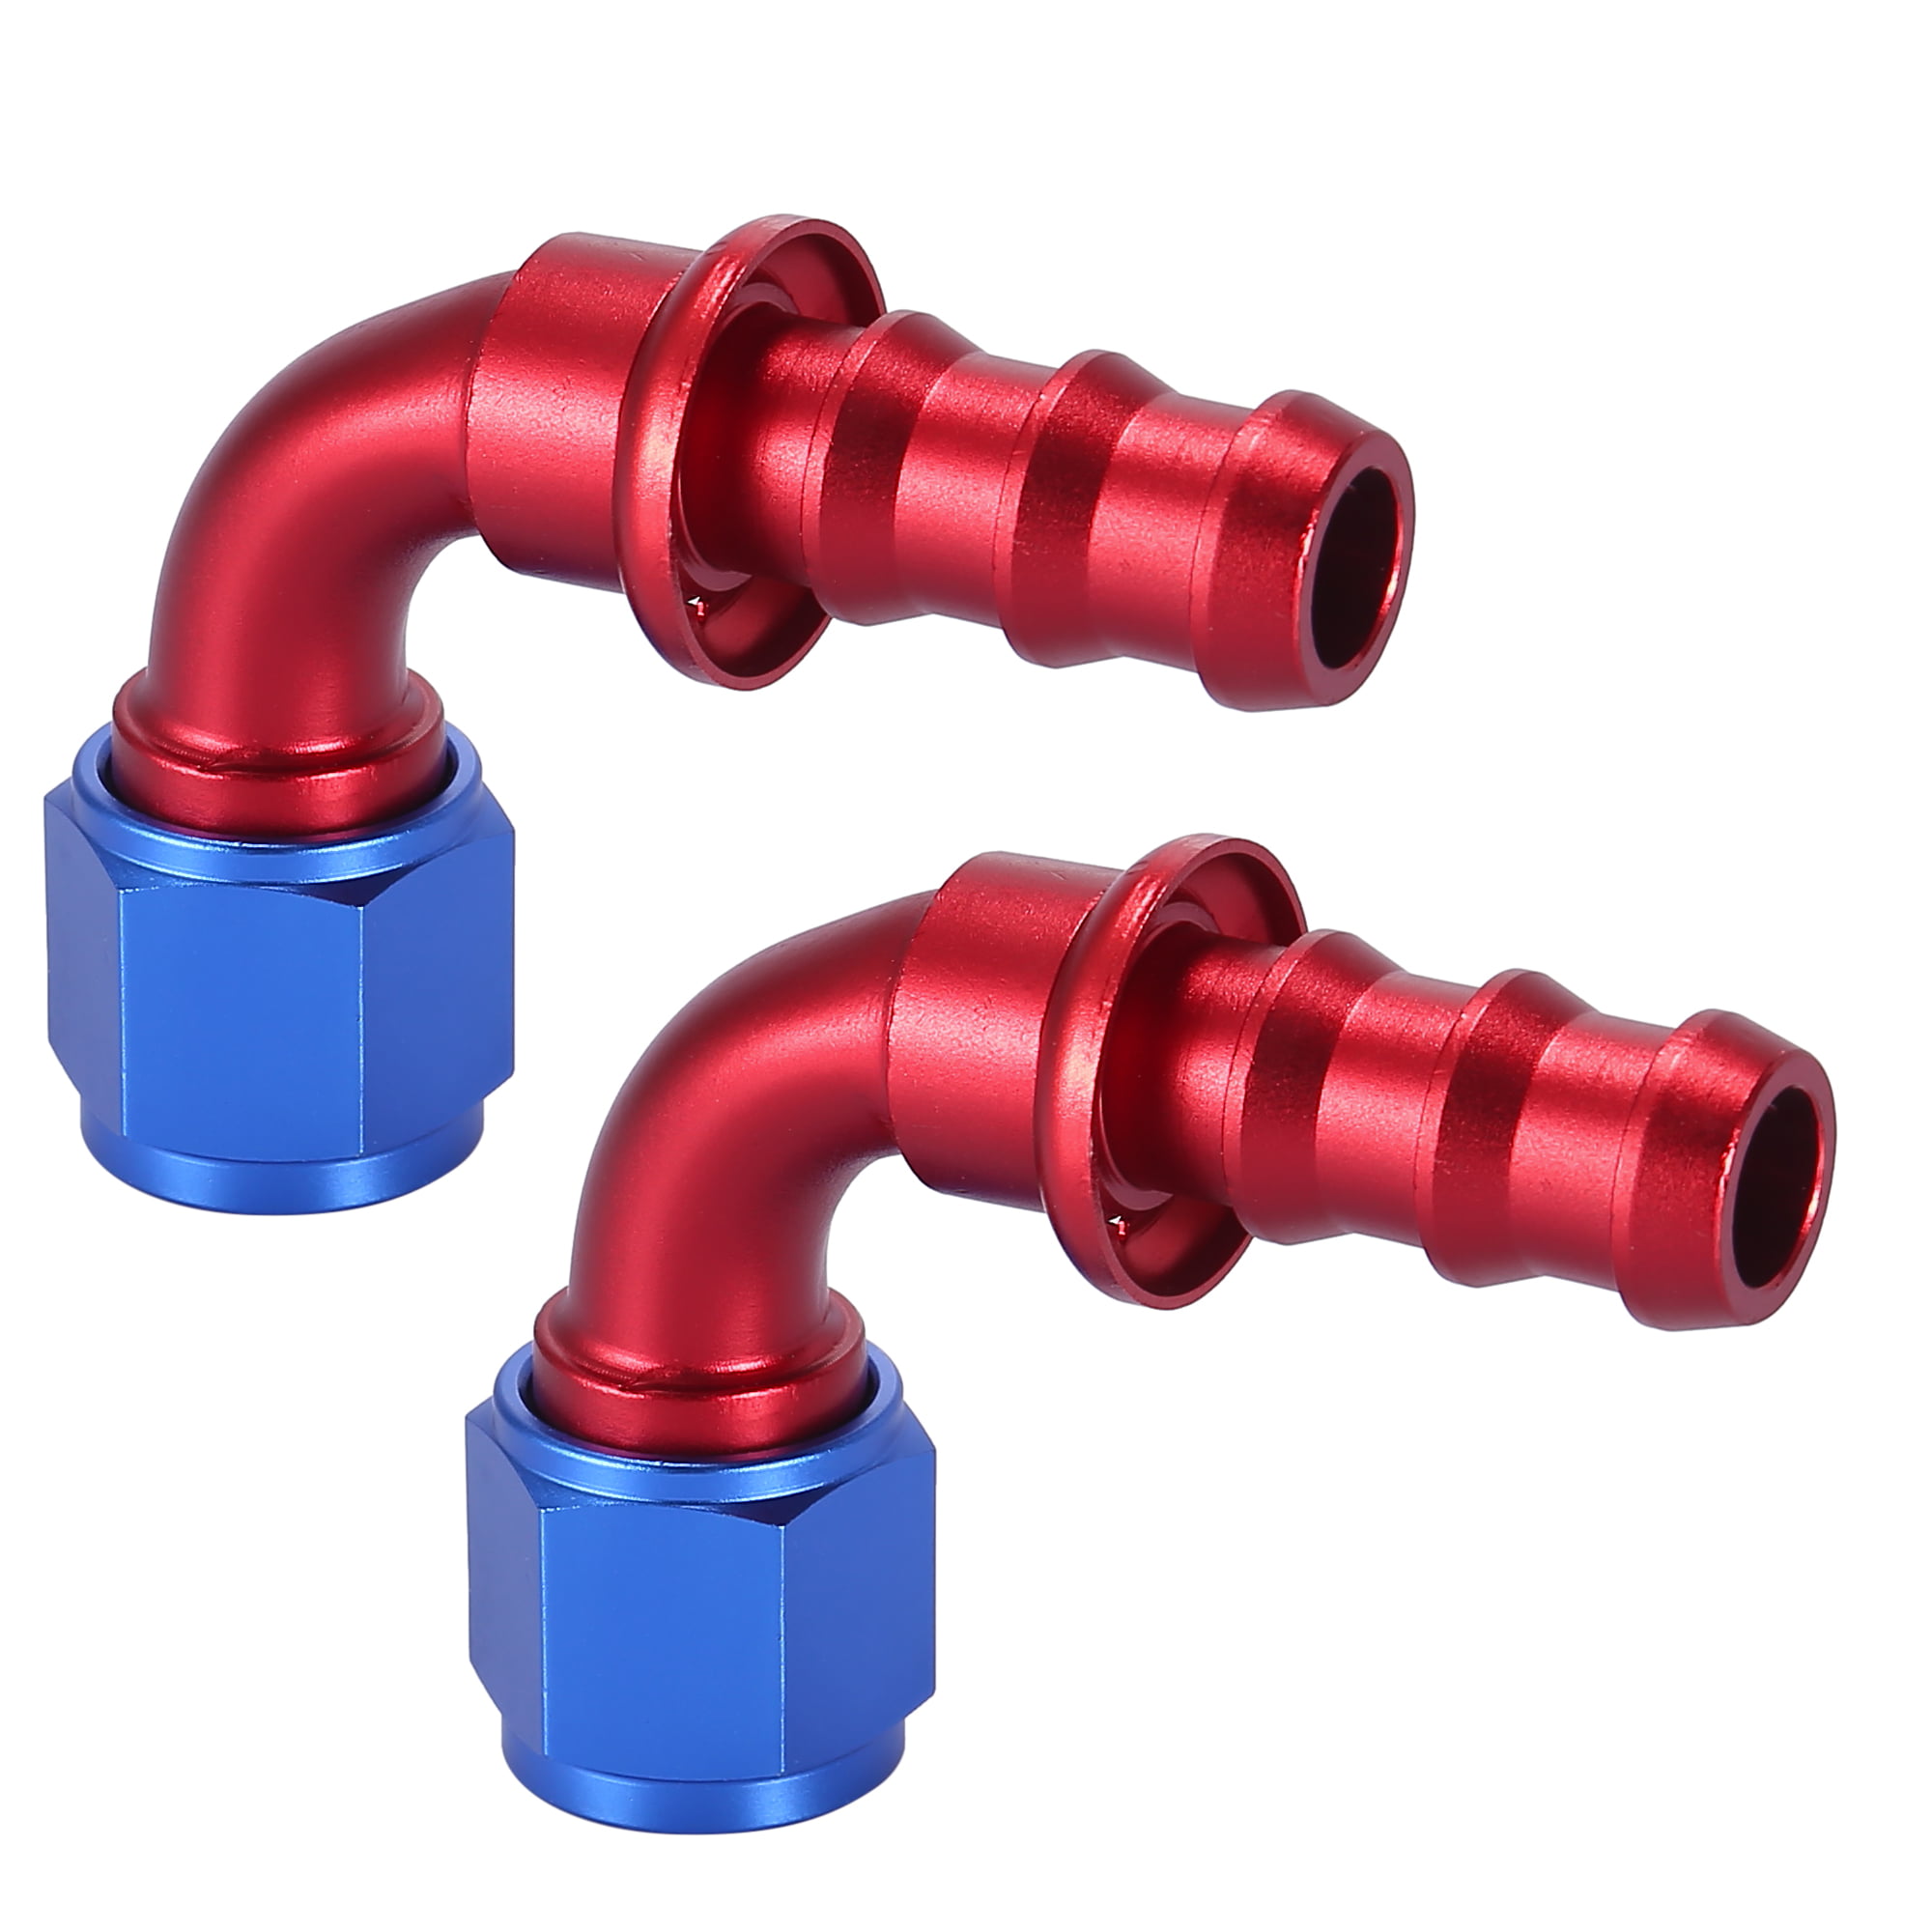 AN6 90 Degree Barb Push-On Hose Fitting Alloy For Fuel Oil Water Hose 6